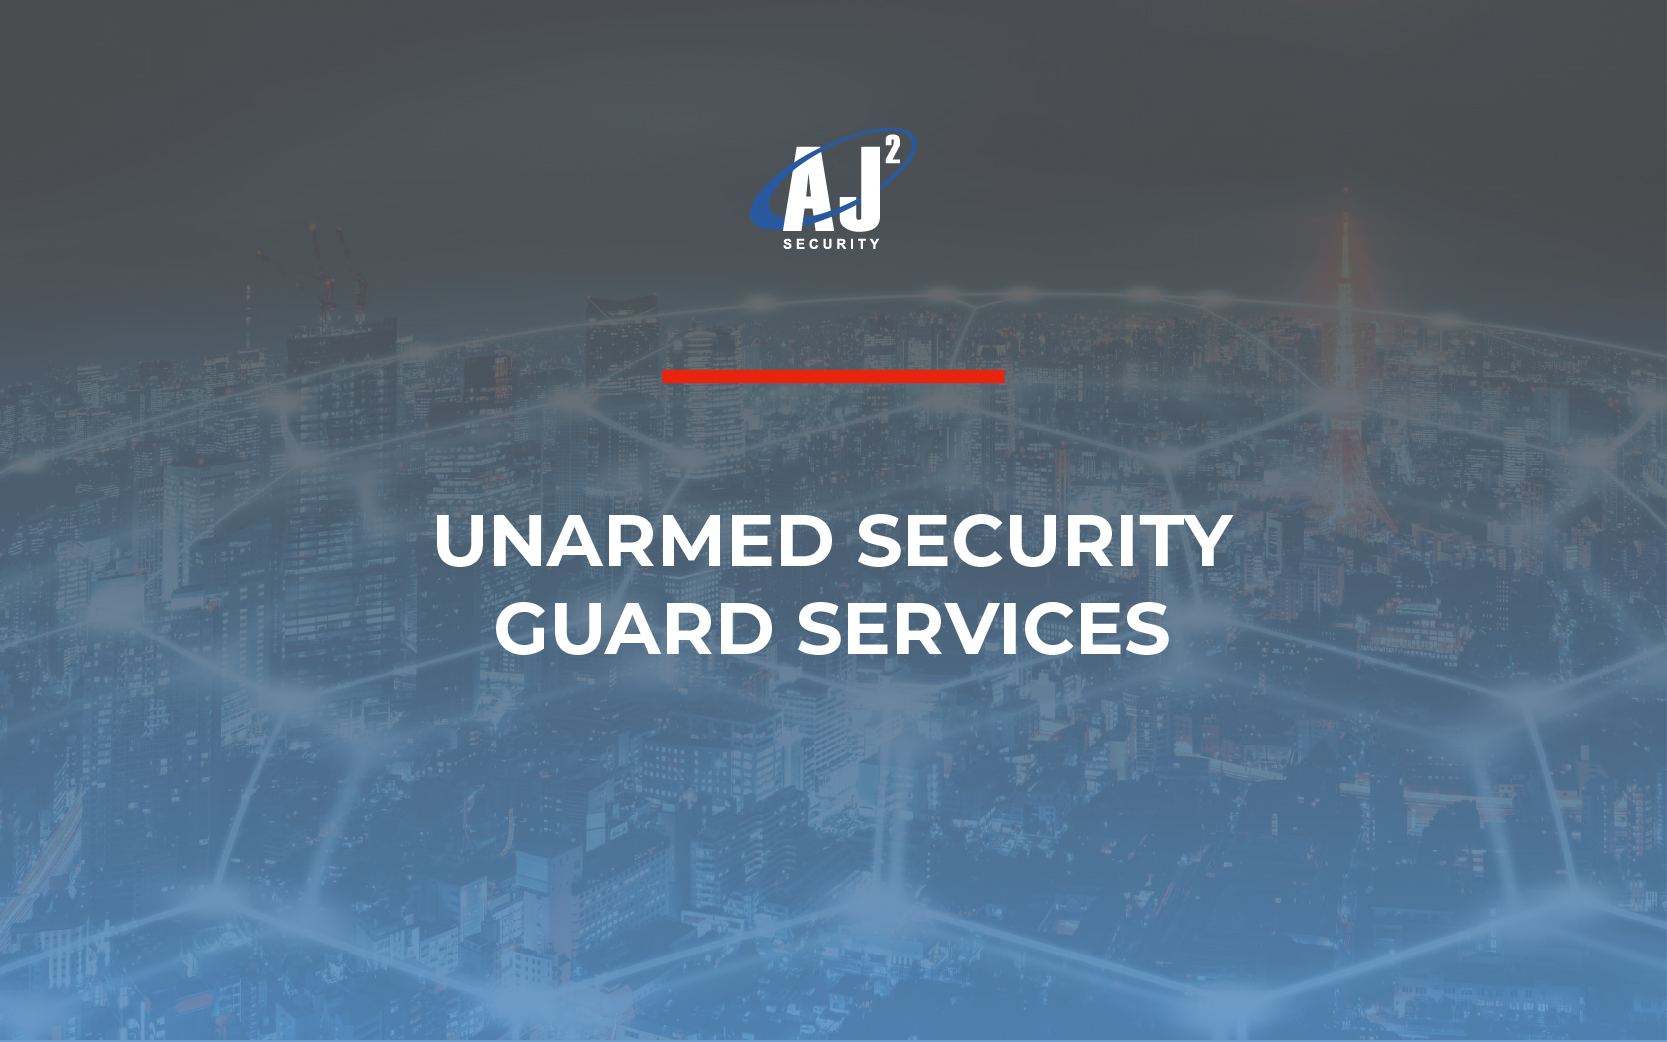 They say there’s a time and place for everything, so when is it time for unarmed security guard services? Learn the answer here with AJ Squared.